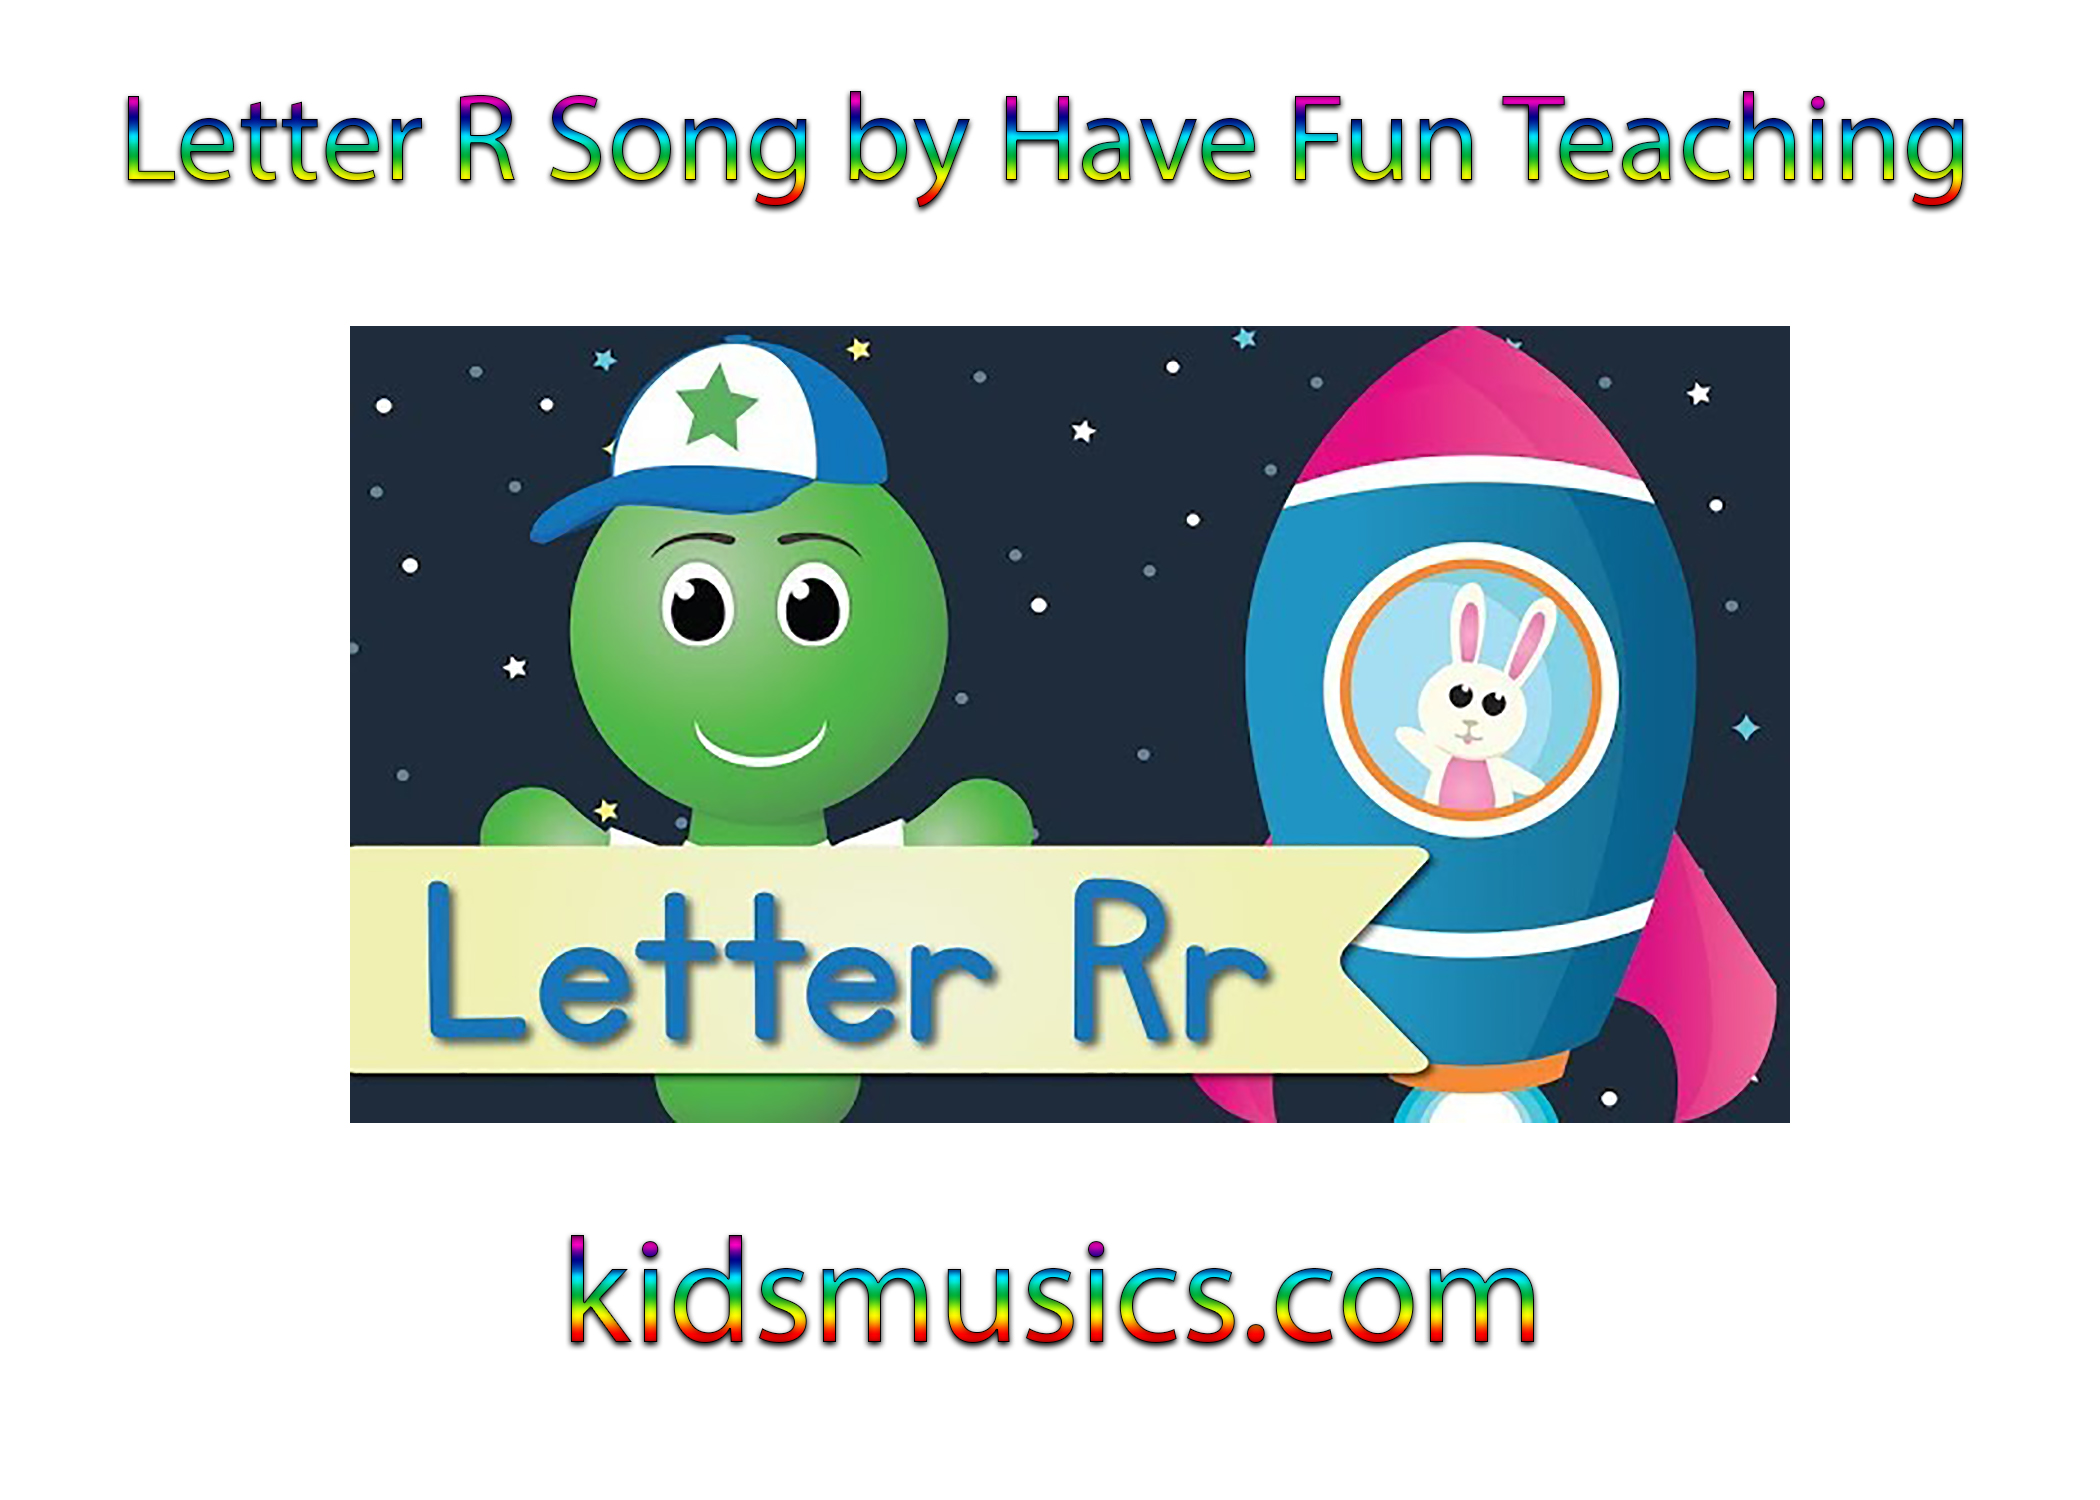 Letter R Song by Have Fun Teaching